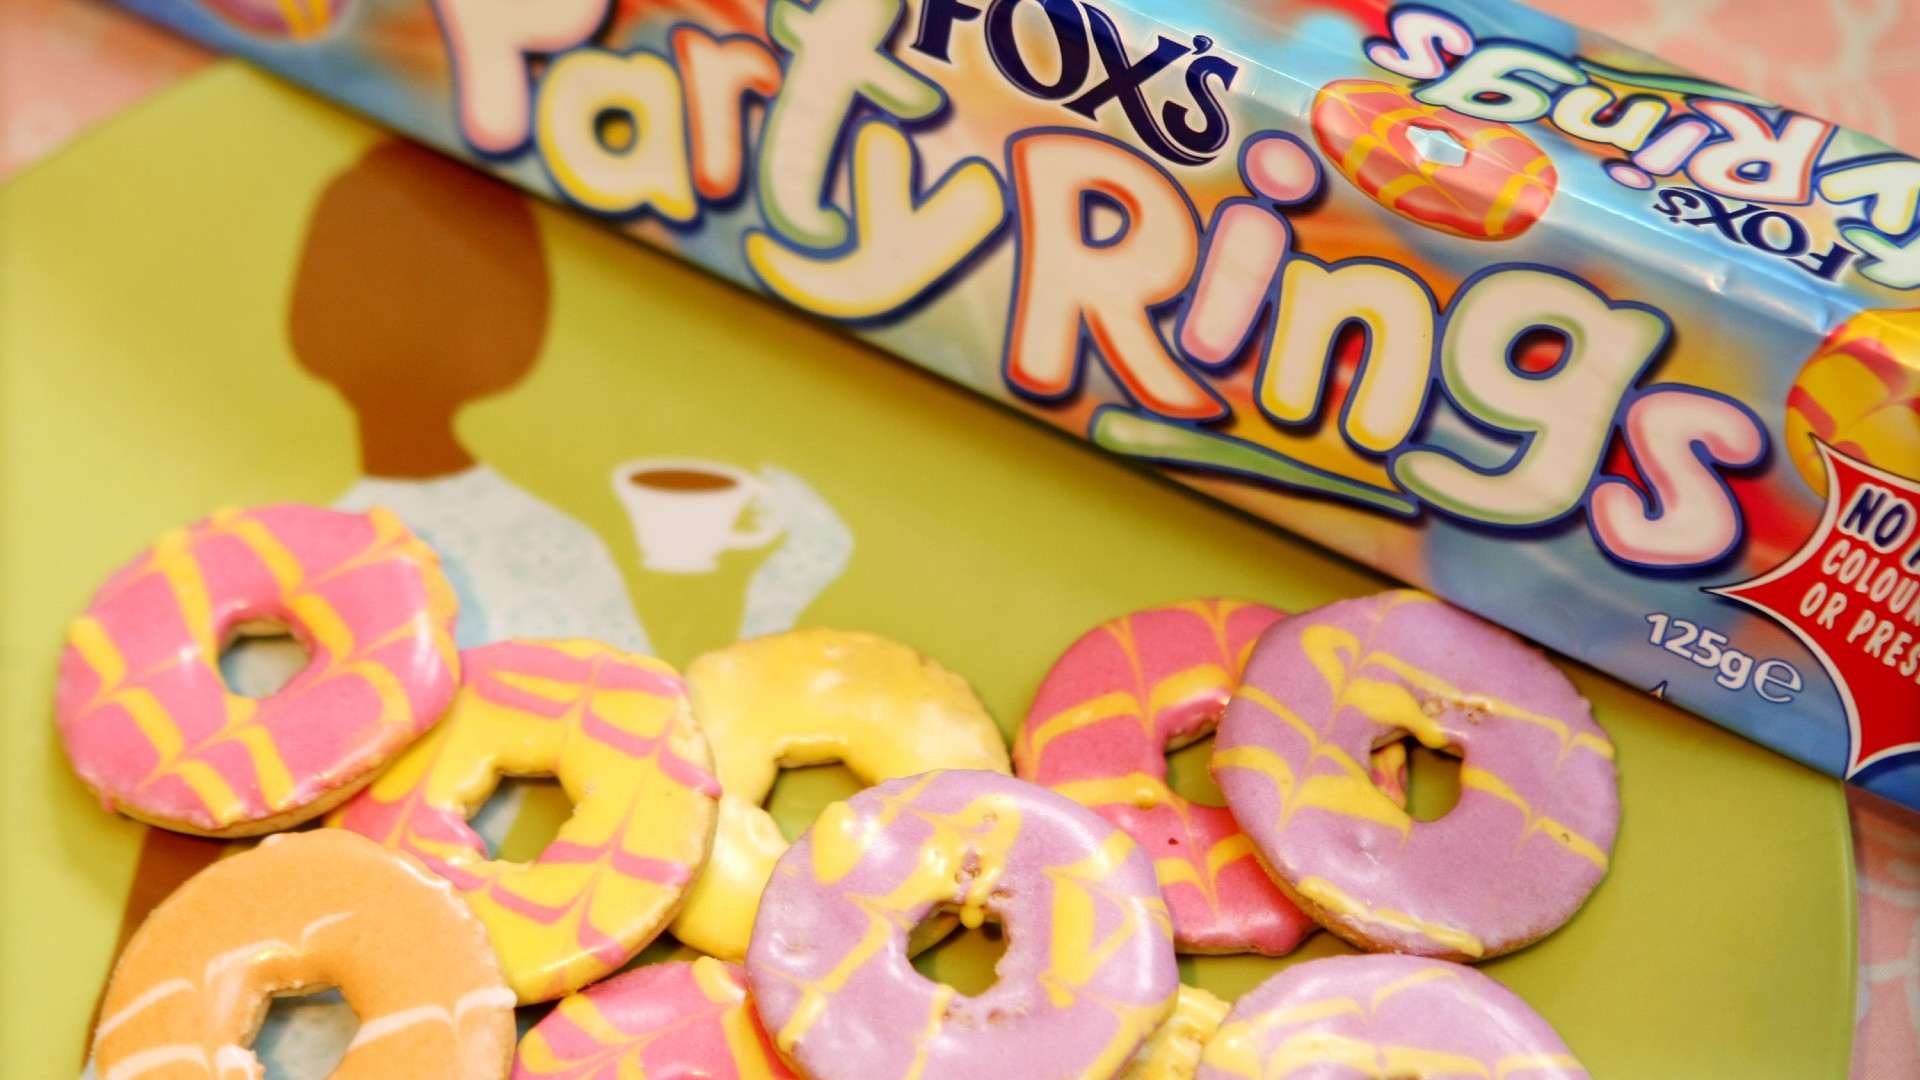 Fox's Party Ring biscuits